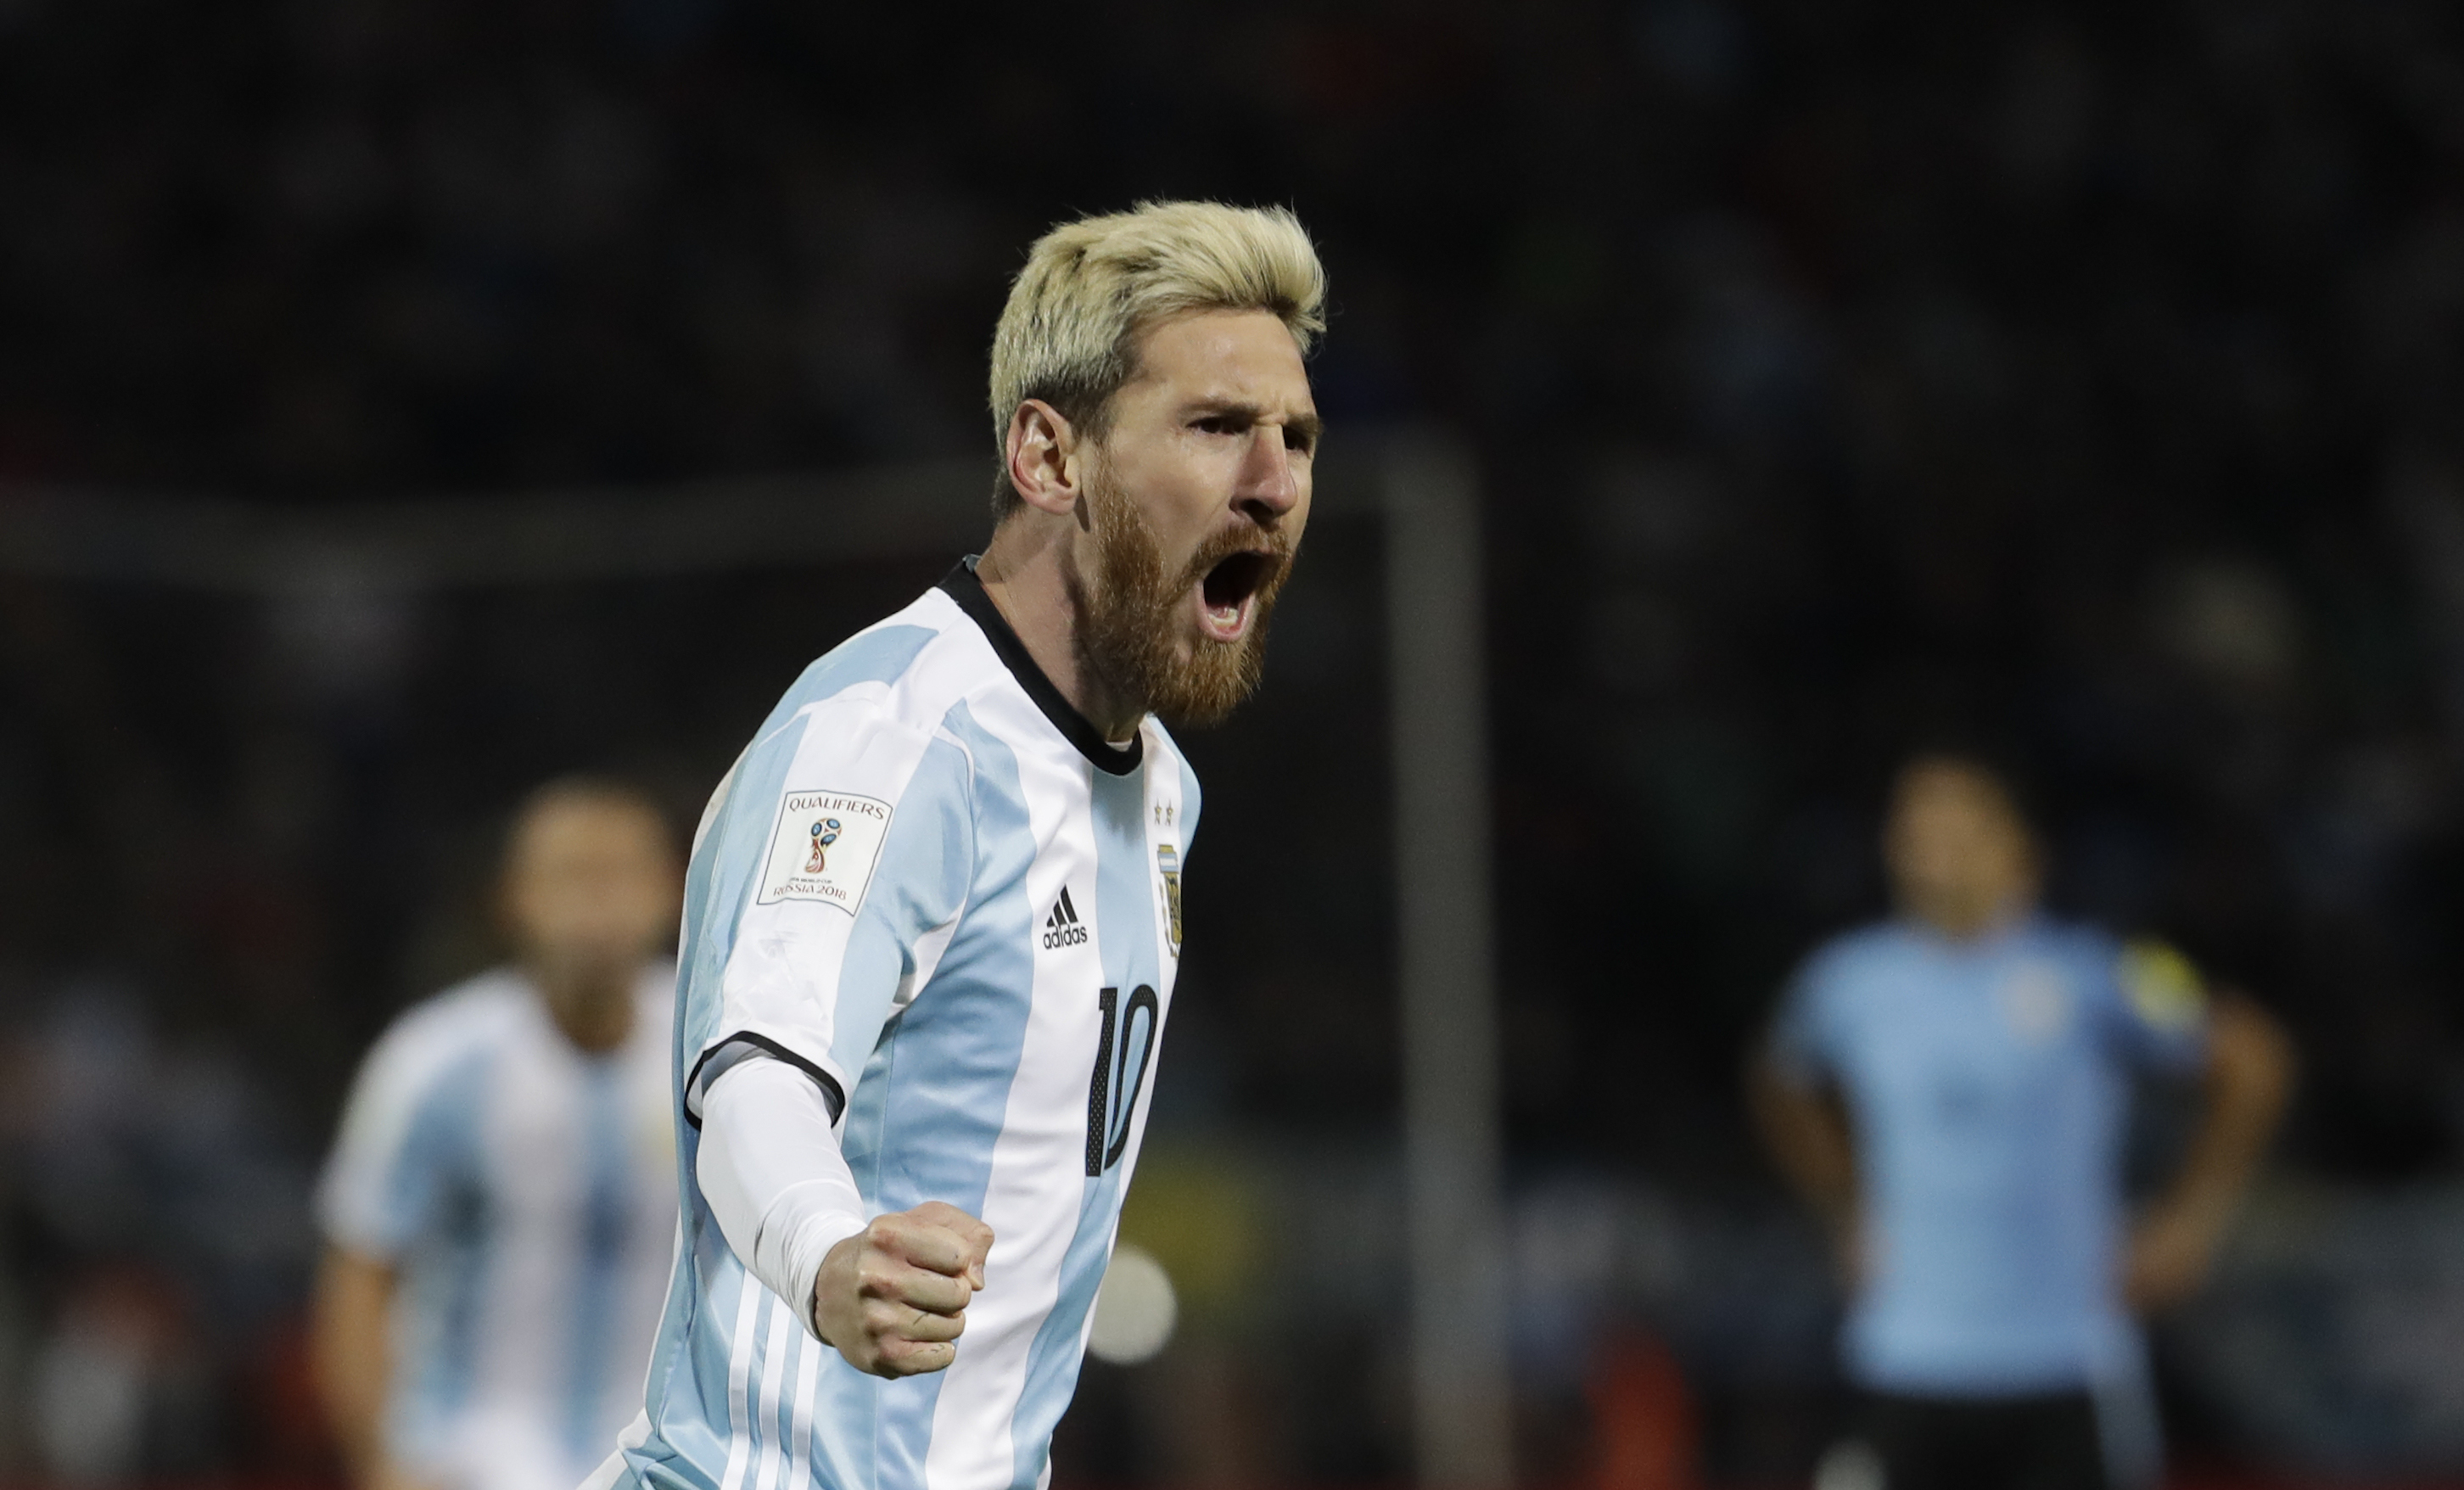 Football: Messi reveals why he went blonde - NZ Herald